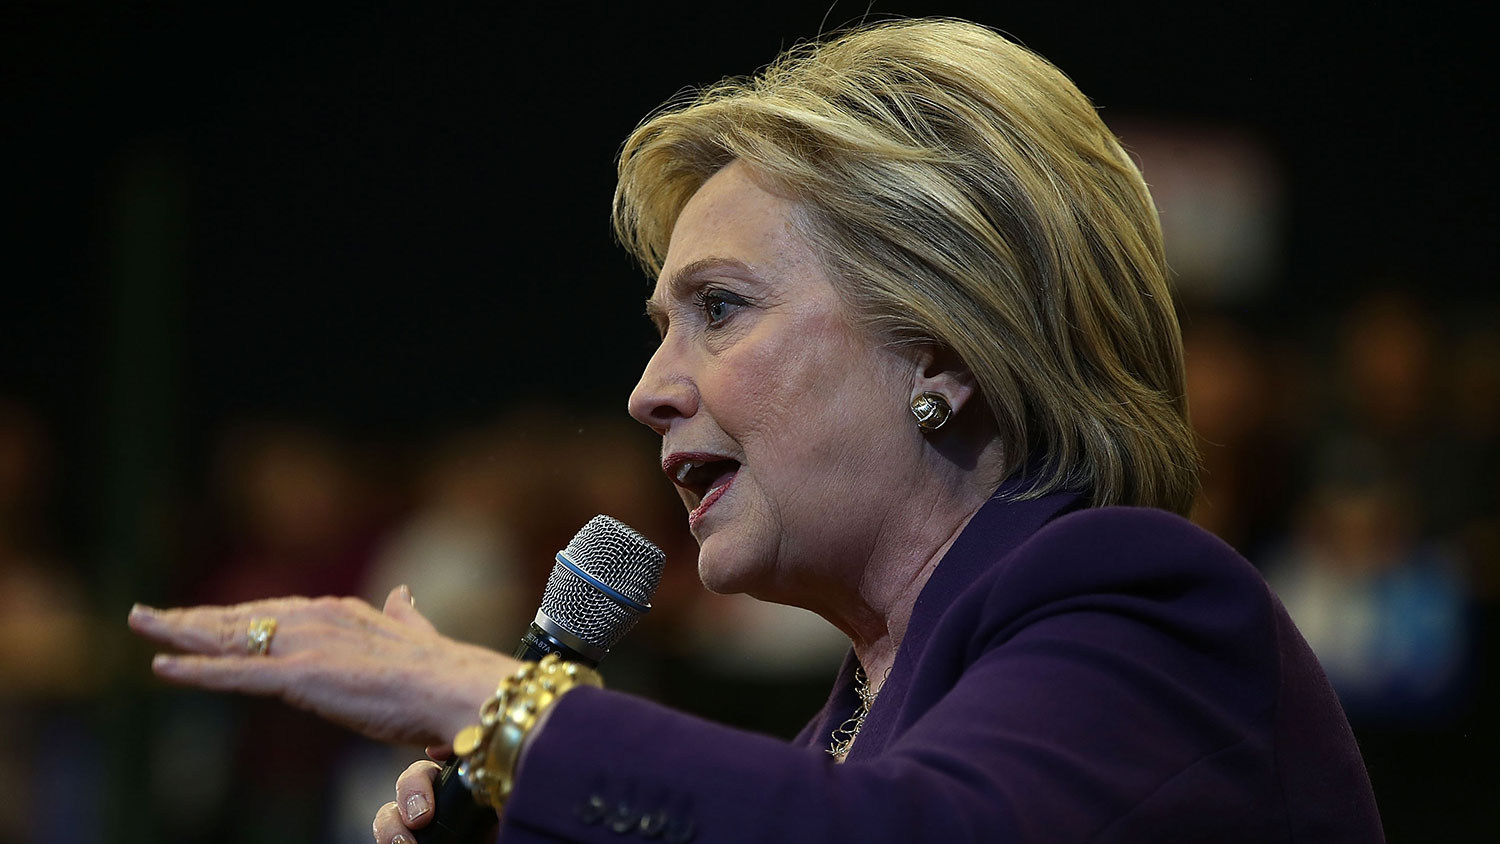 Democratic presidential candidate Hillary Clinton speaks on Feb. 2, 2016, in Nashua, New Hampshire.
